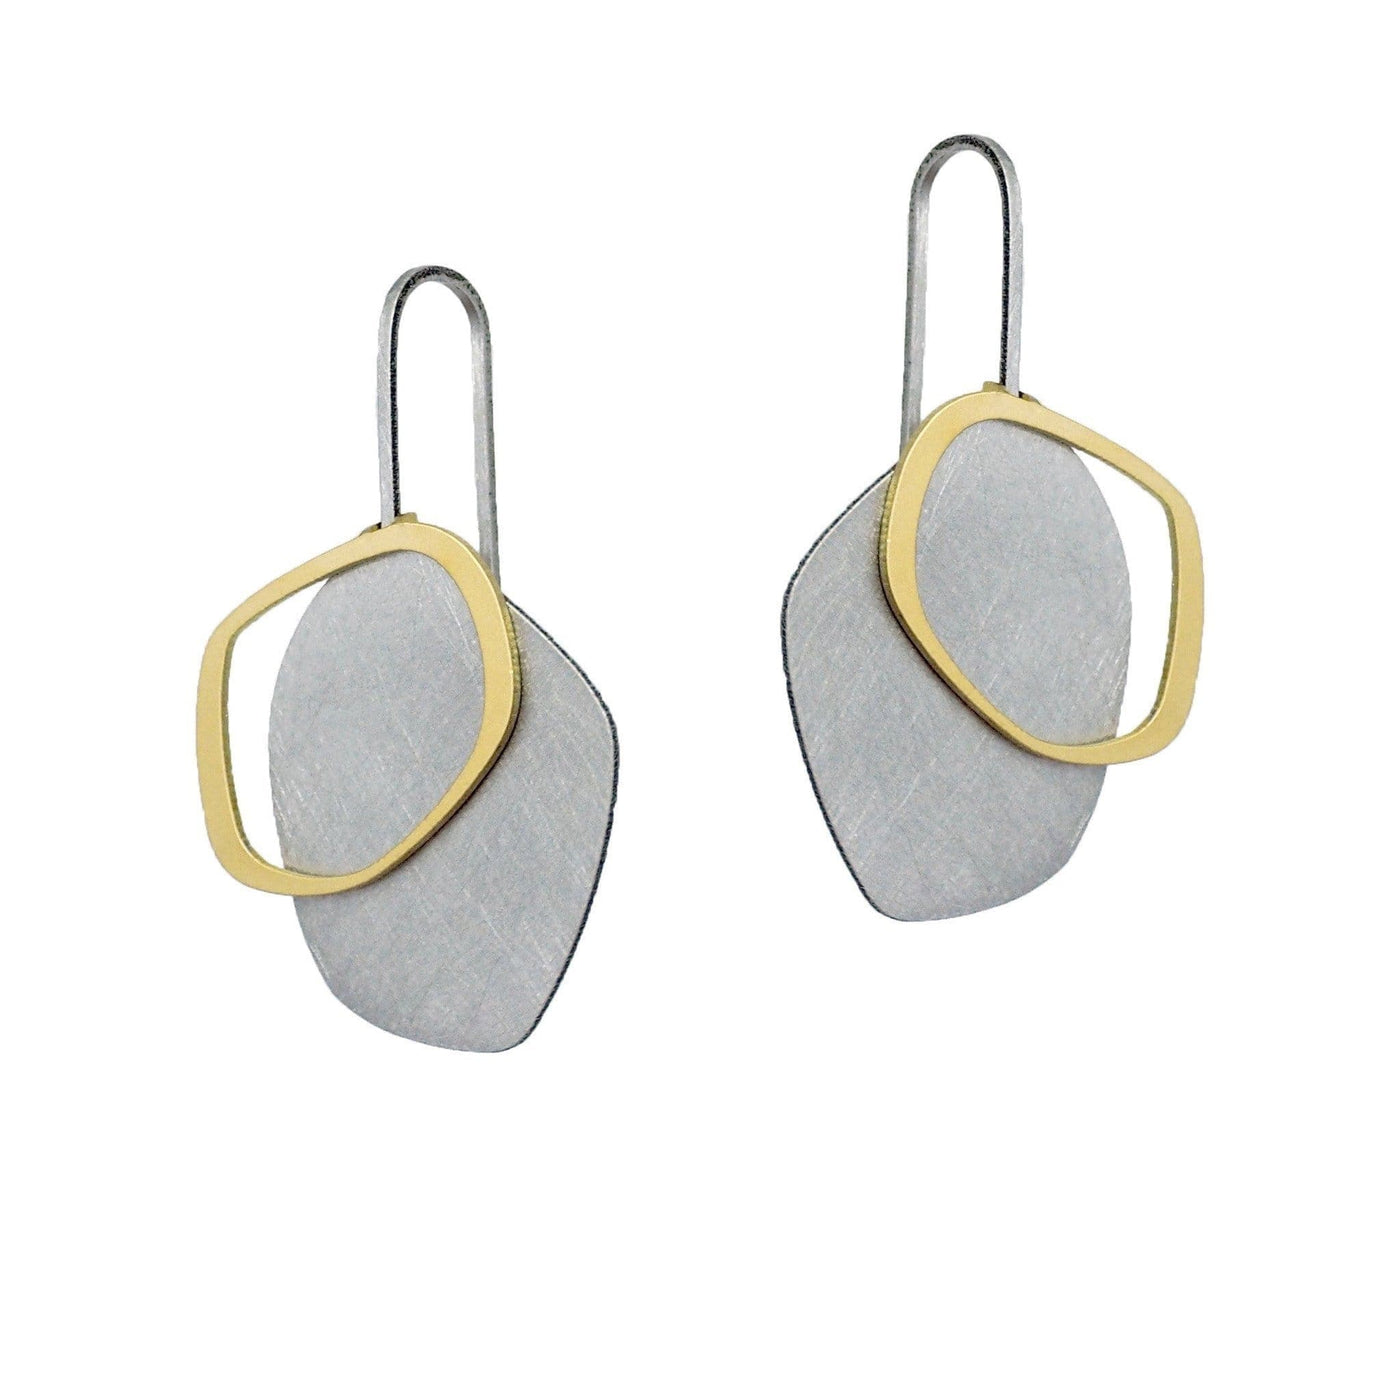 X2 Small Solid Earrings - Raw/ Gold - inSync design